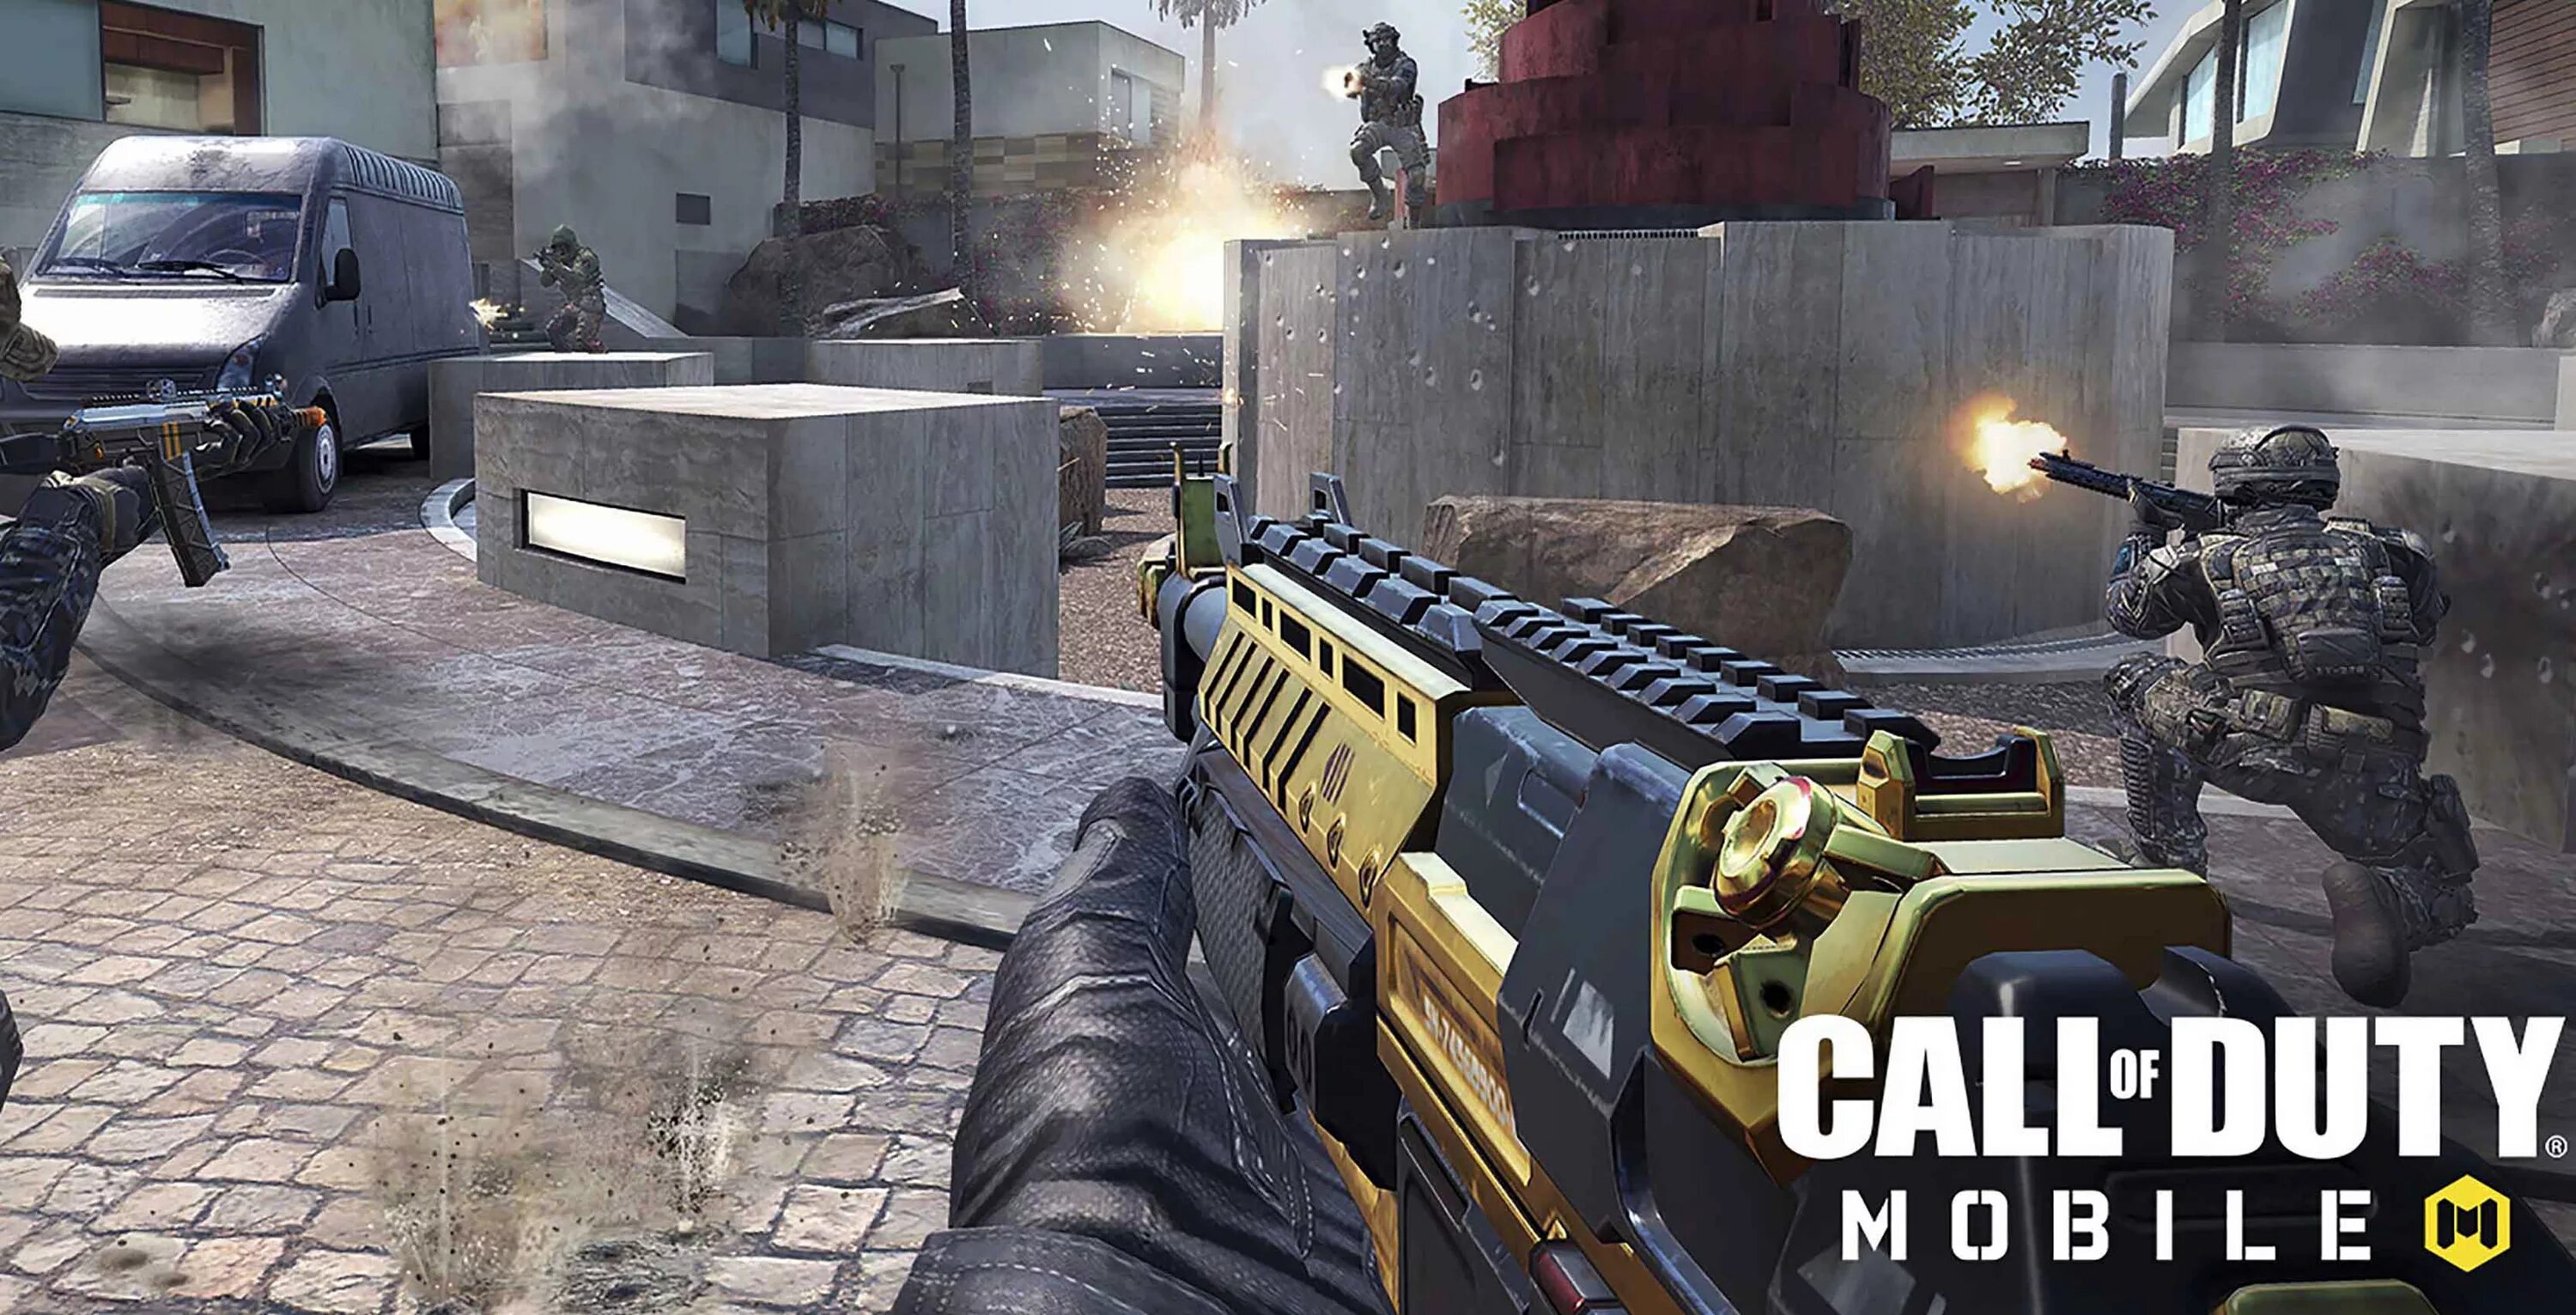 Call of Duty mobile. Игра Call of Duty mobile 2. Call of Duty mobile фото. Call of Duty 8. Call of duty mobile cod